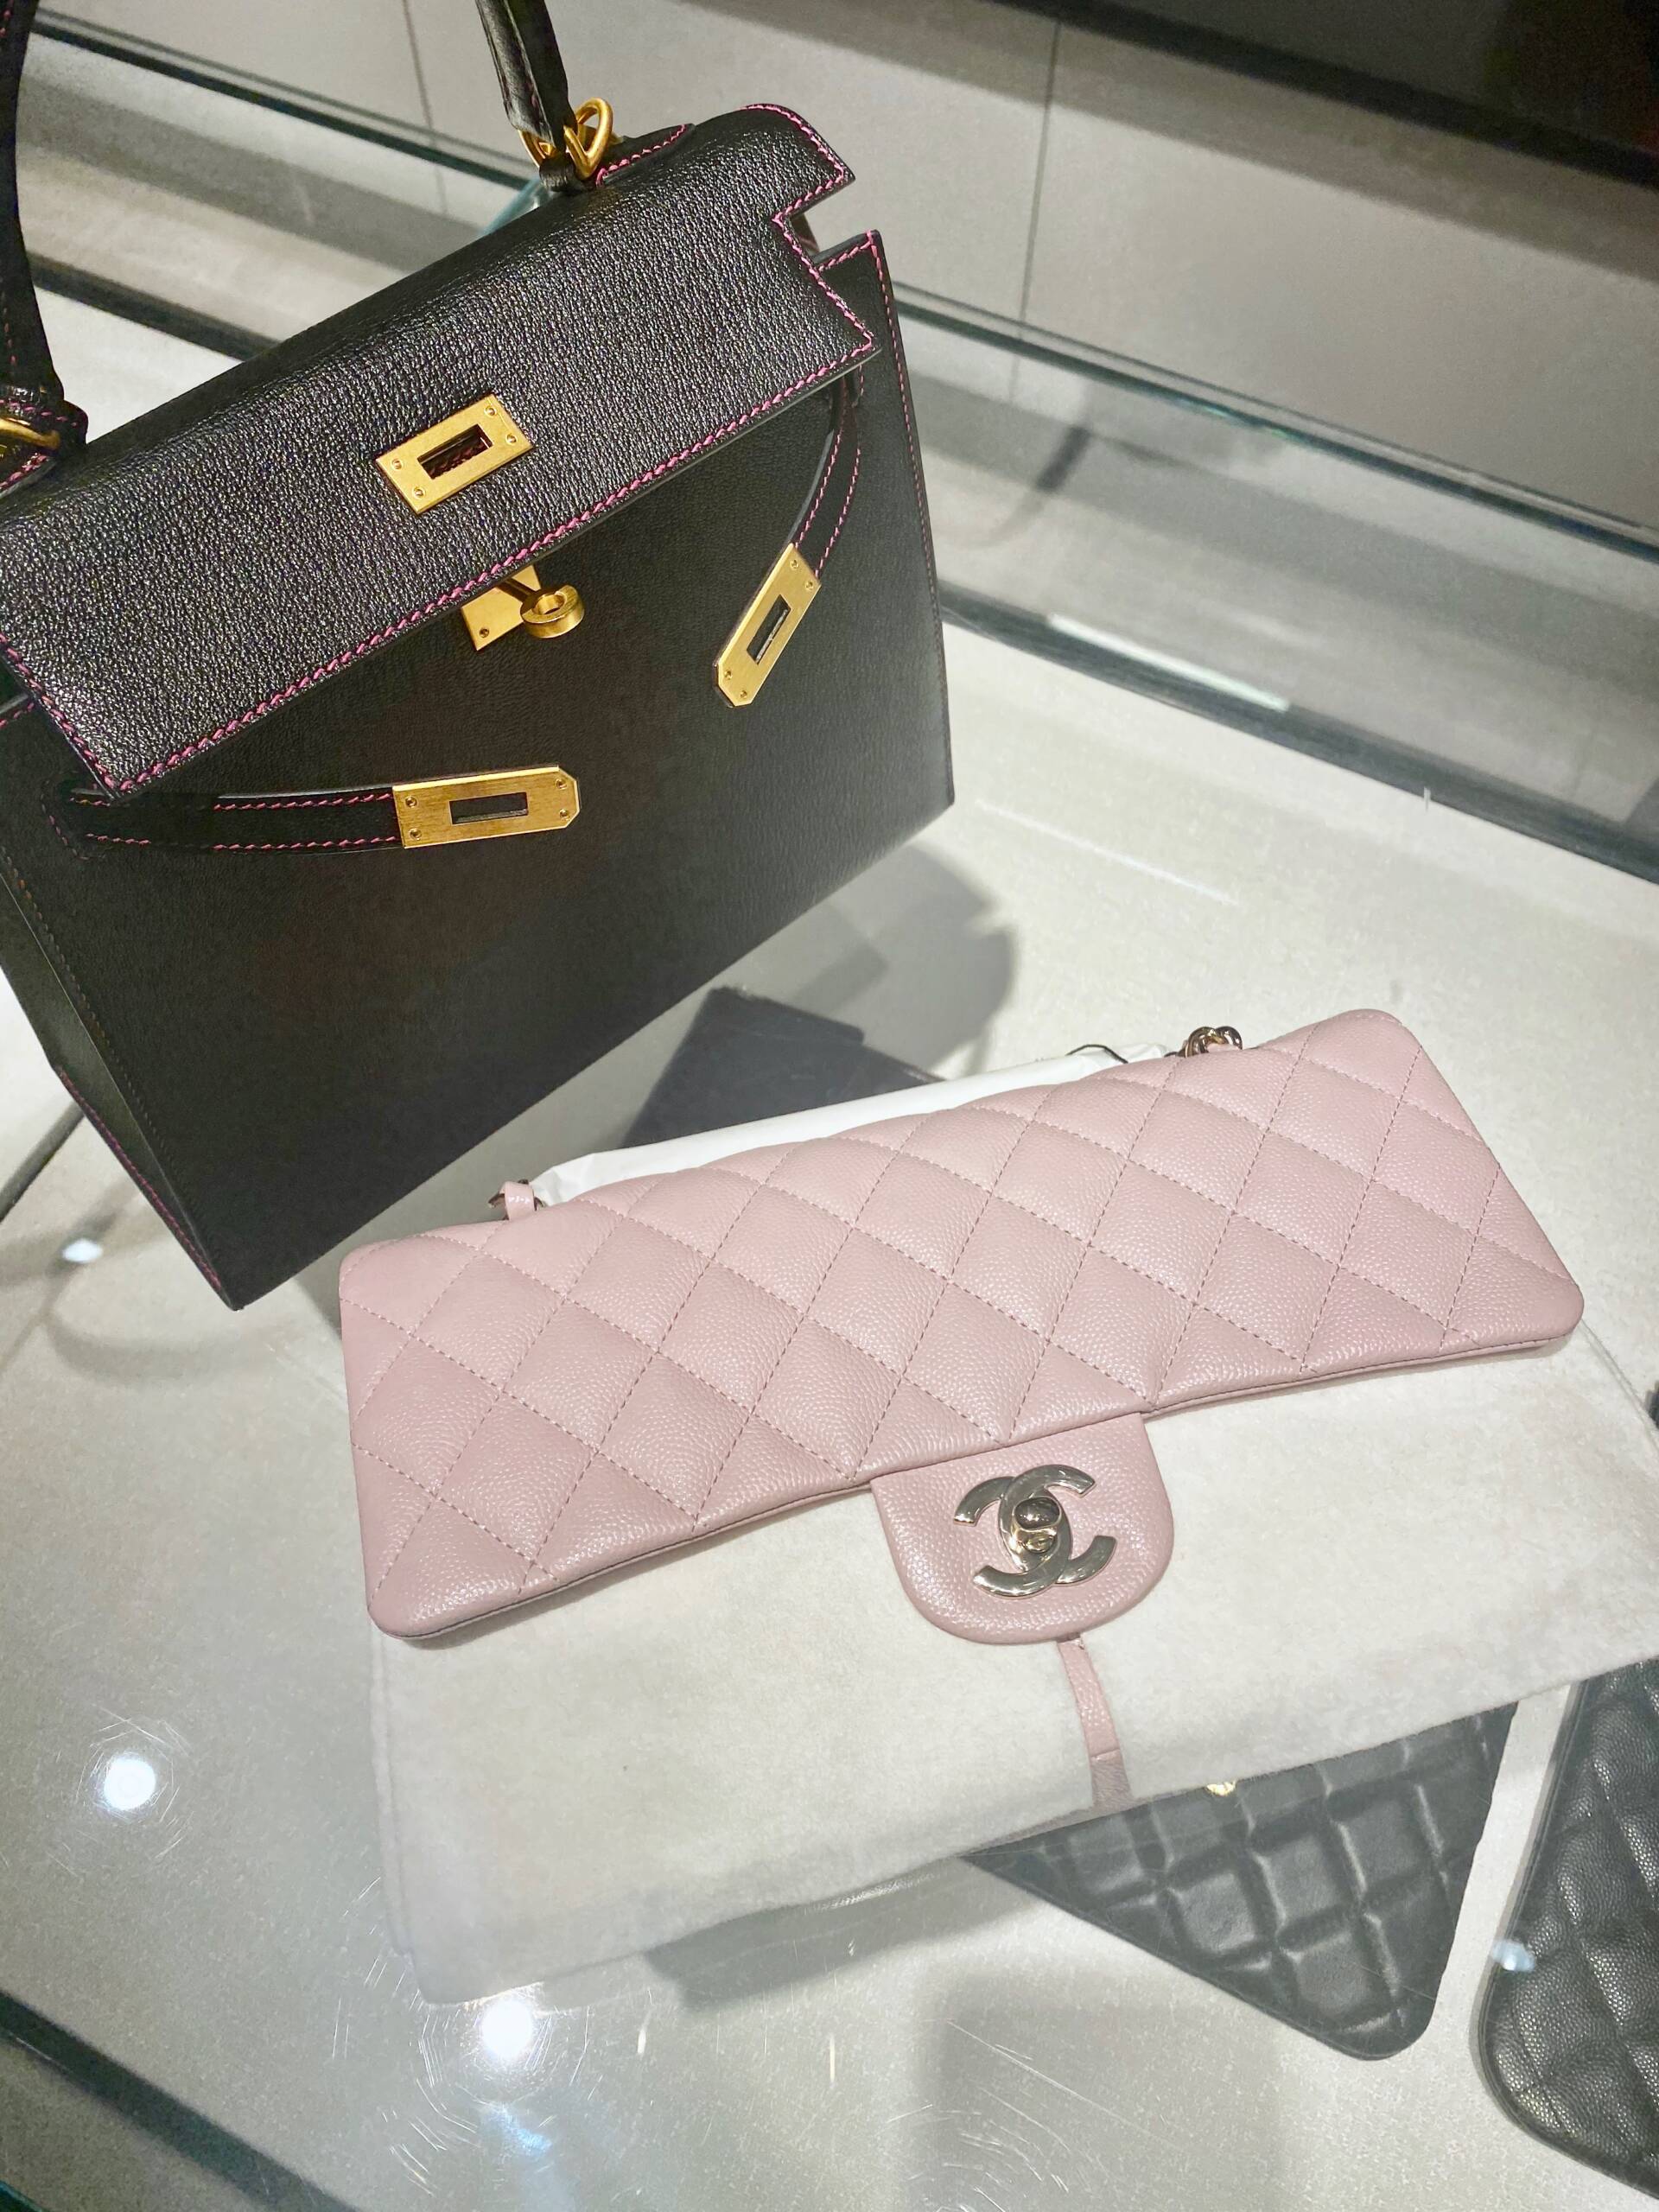 🦄BRAND NEW! 2021 CHANEL COCO Crush Classic Small Violet Clair Purple GHW  Bag 🦄 